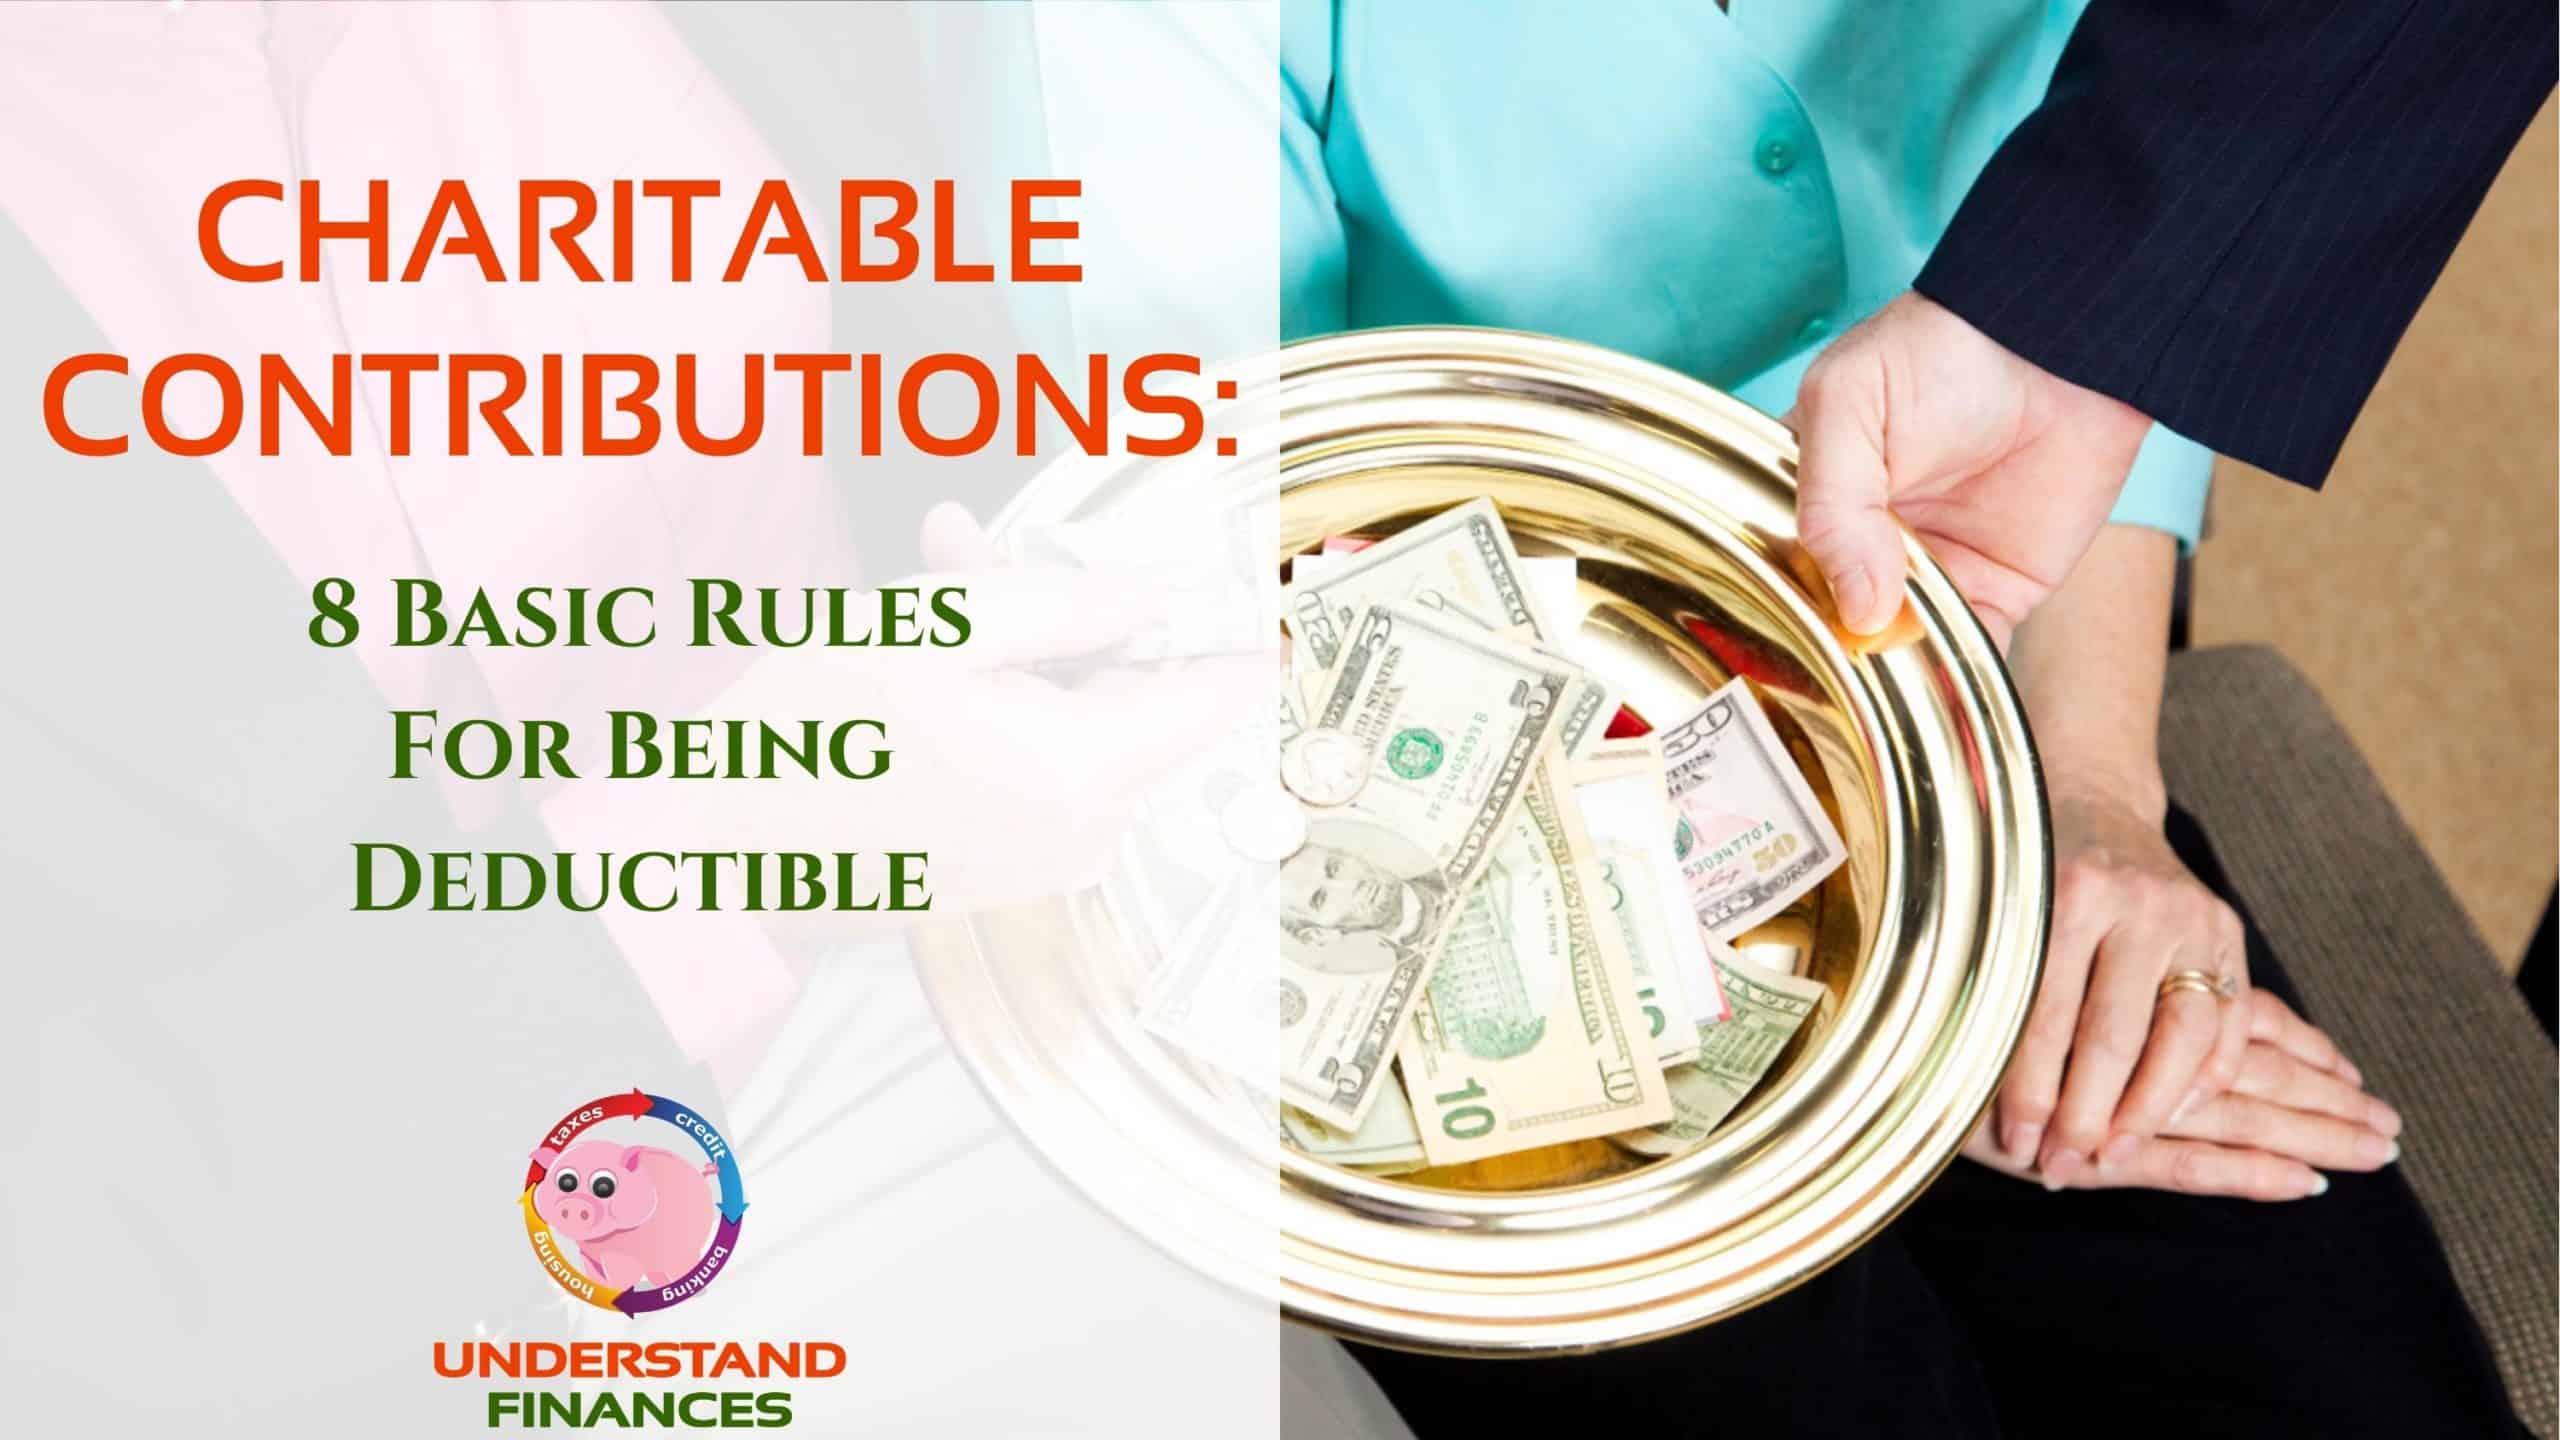 Charitable Contributions: 8 Basic Rules For Being Deductible